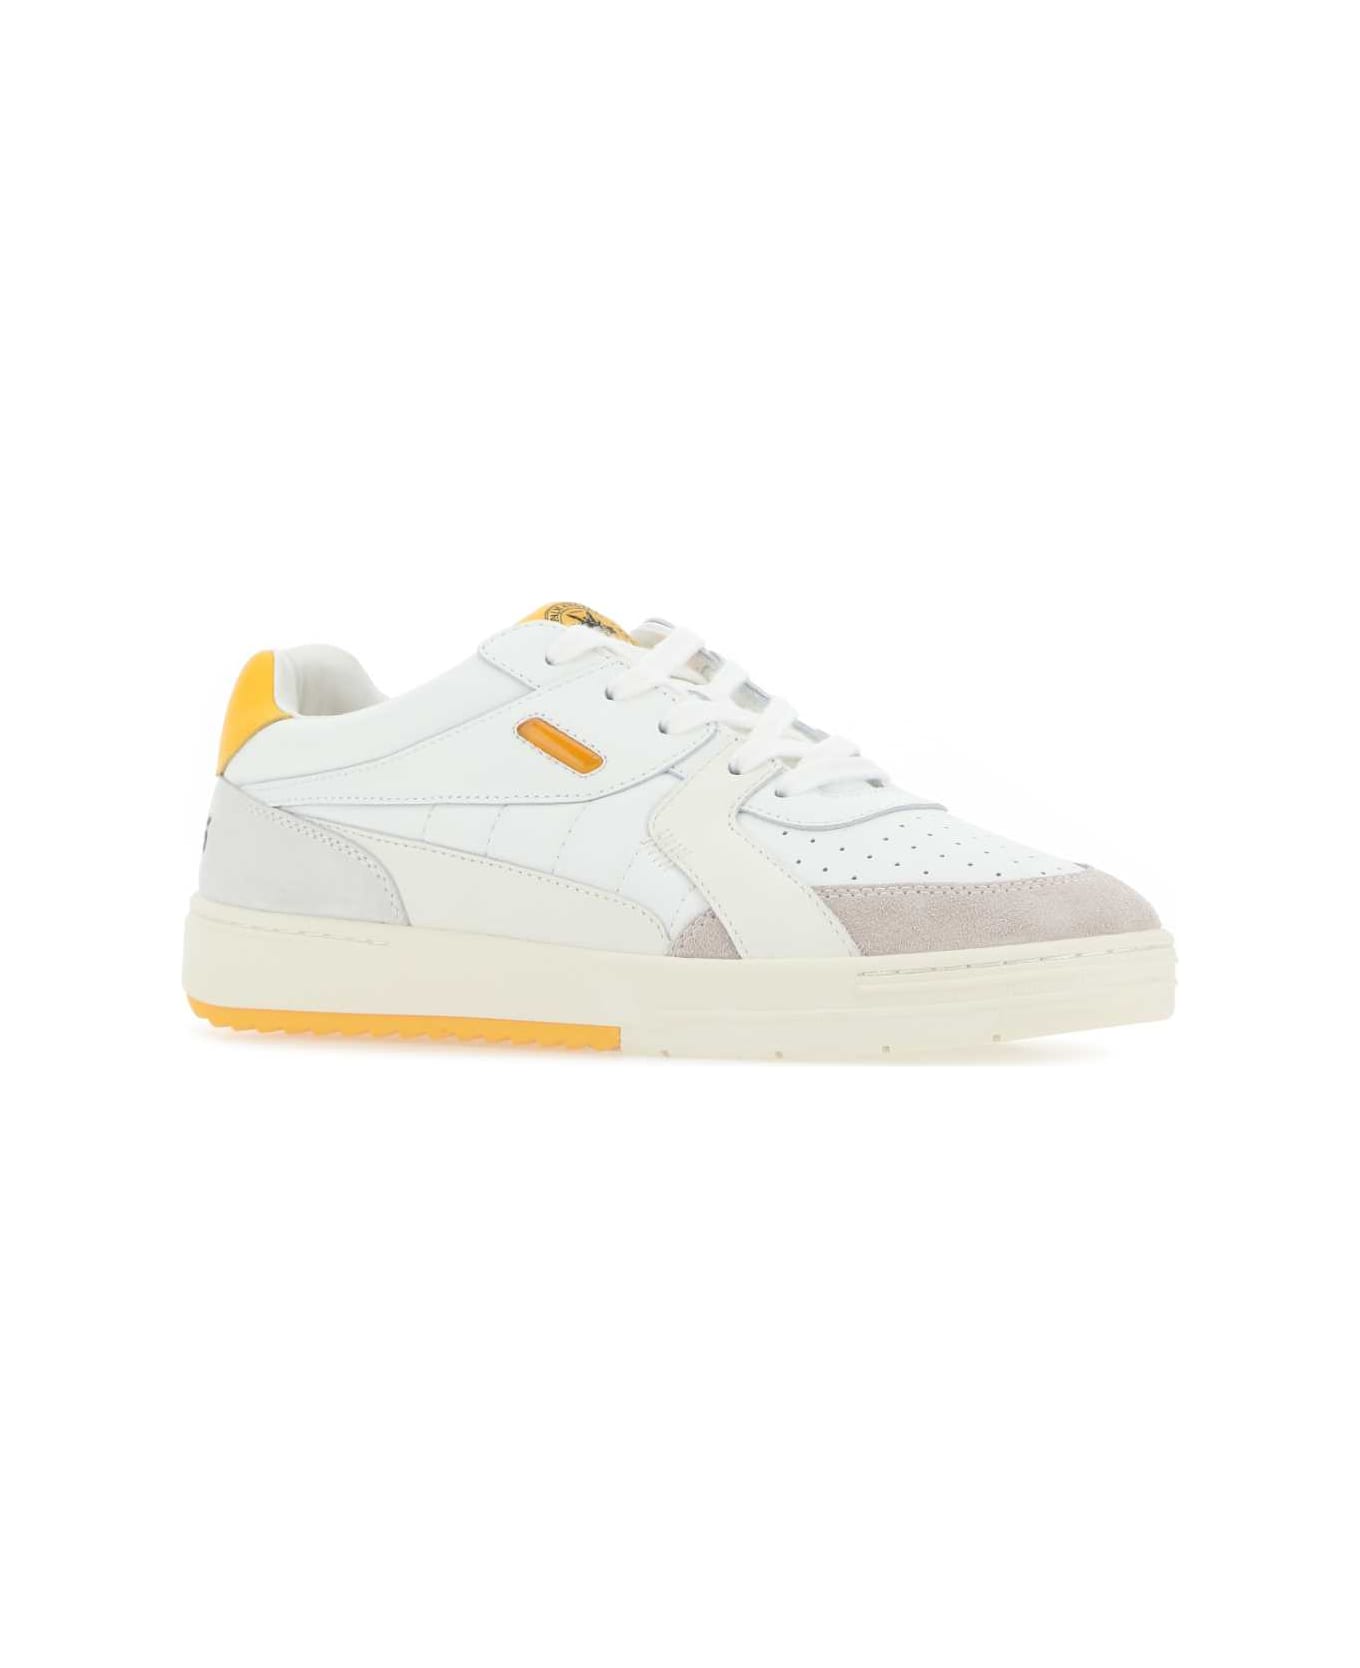 Palm Angels Multicolor Leather Palm University Sneakers - 0118 スニーカー